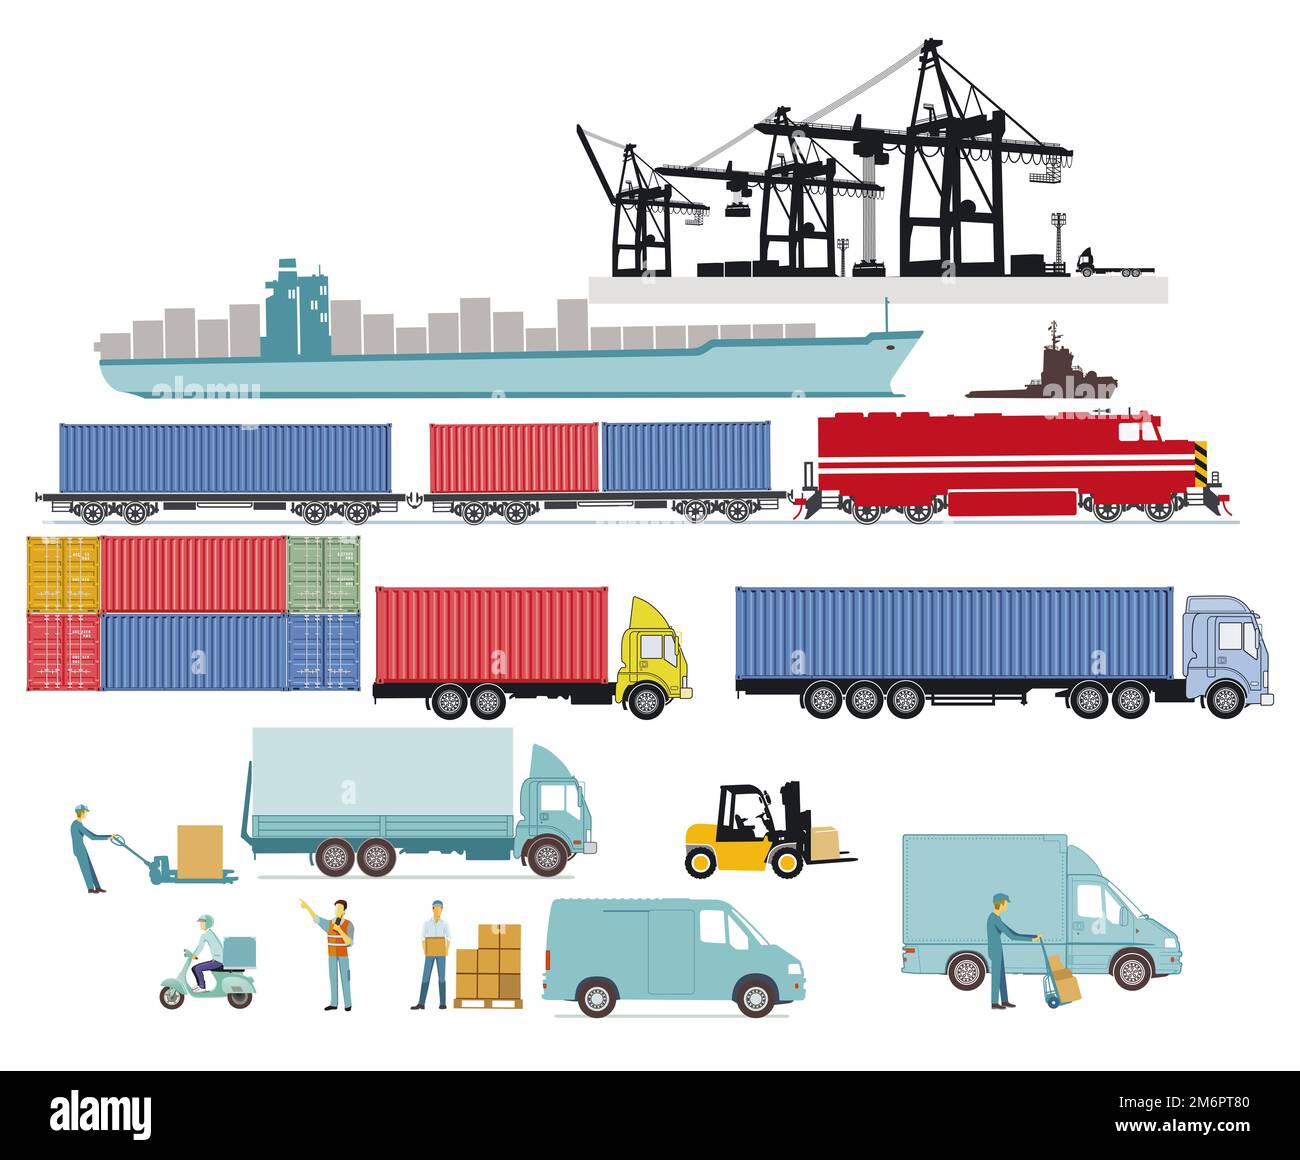 Logistic and shipping, container transportation, illustration Stock Photo